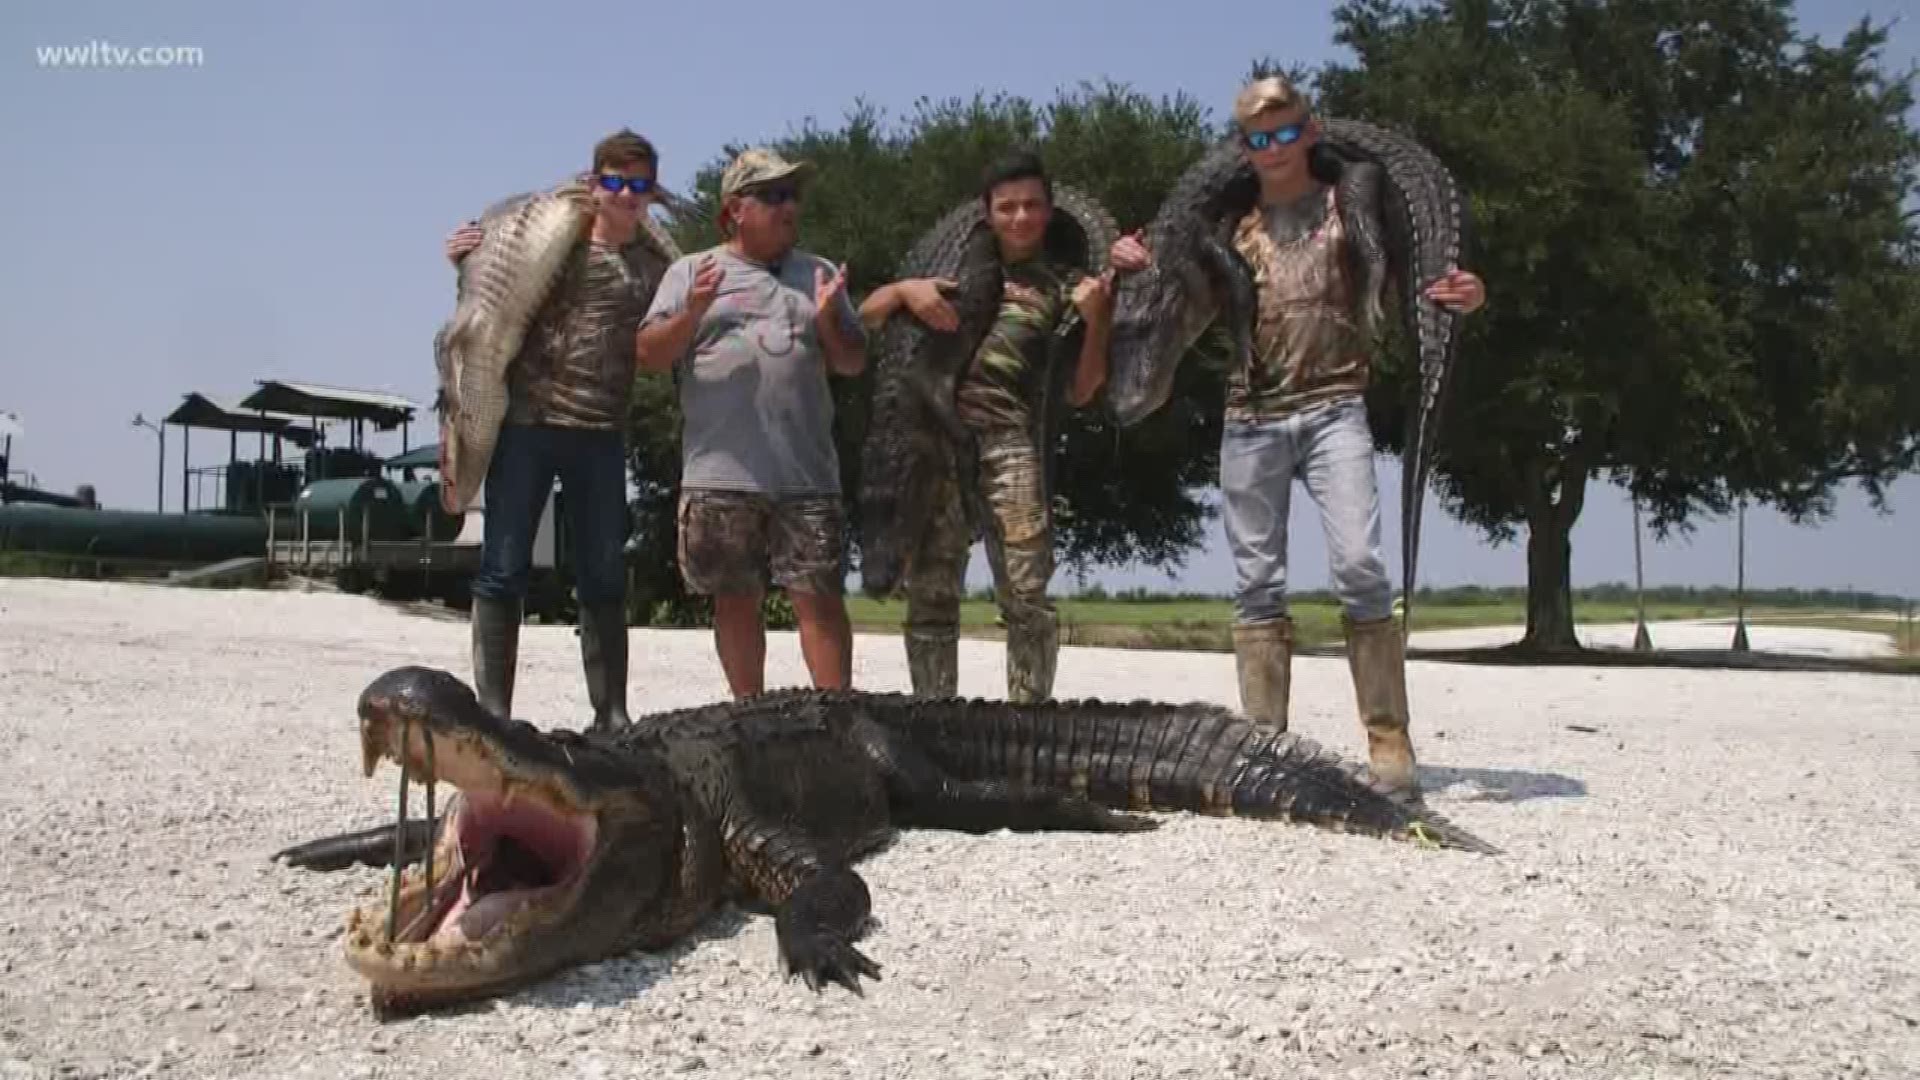 Hunting for alligators is popular in south Louisiana, but unlike casting a line for fish, hauling in an alligator has some element of danger.